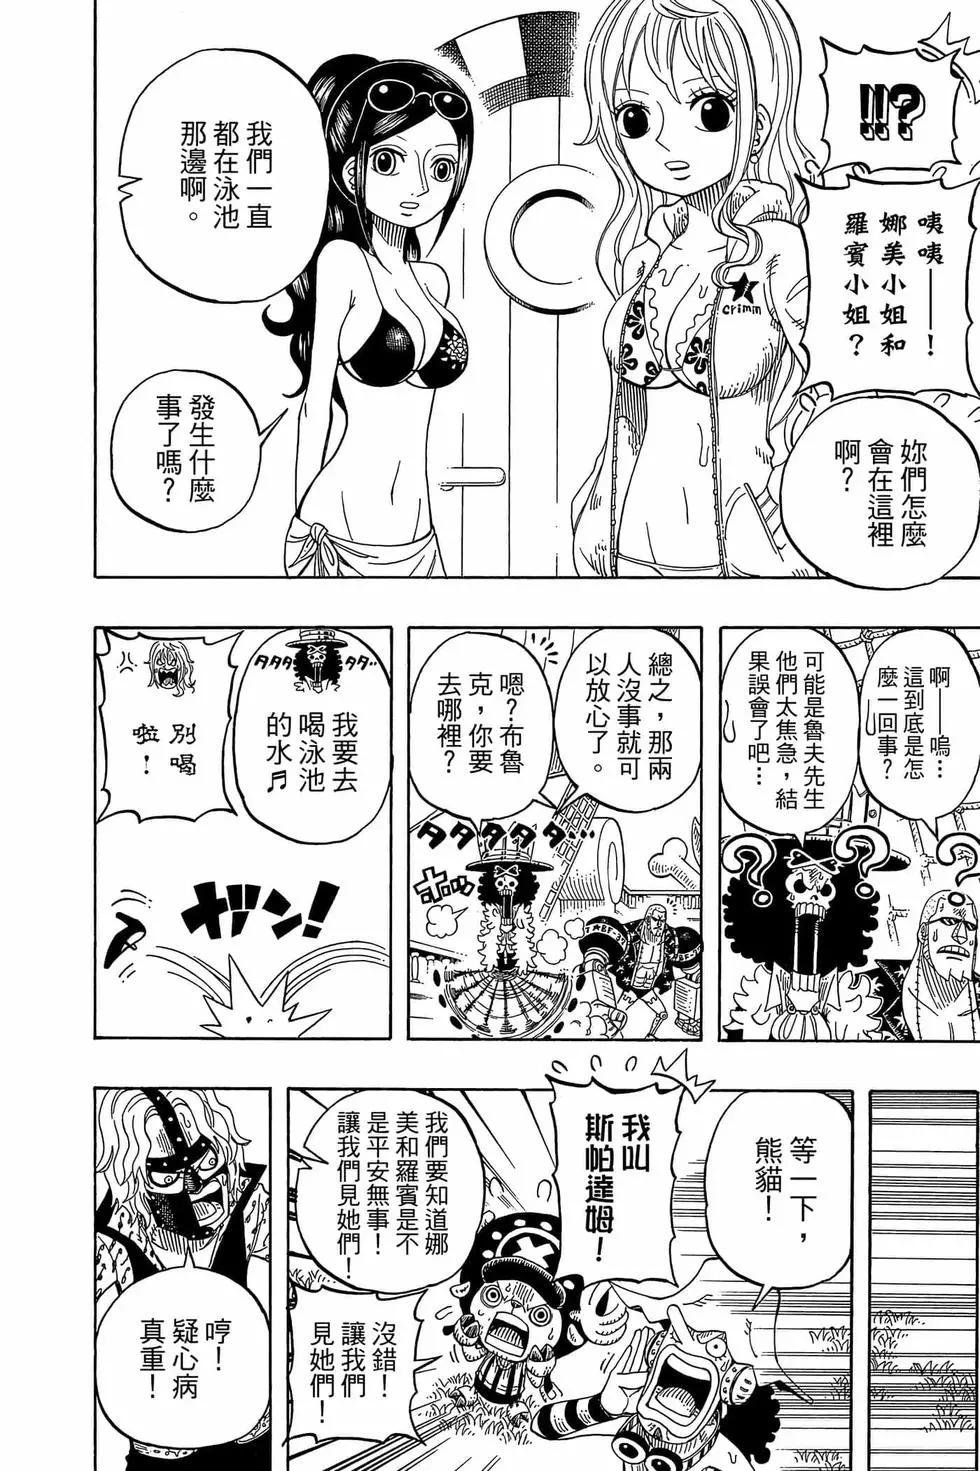 One piece party - 第01卷(2/4) - 7